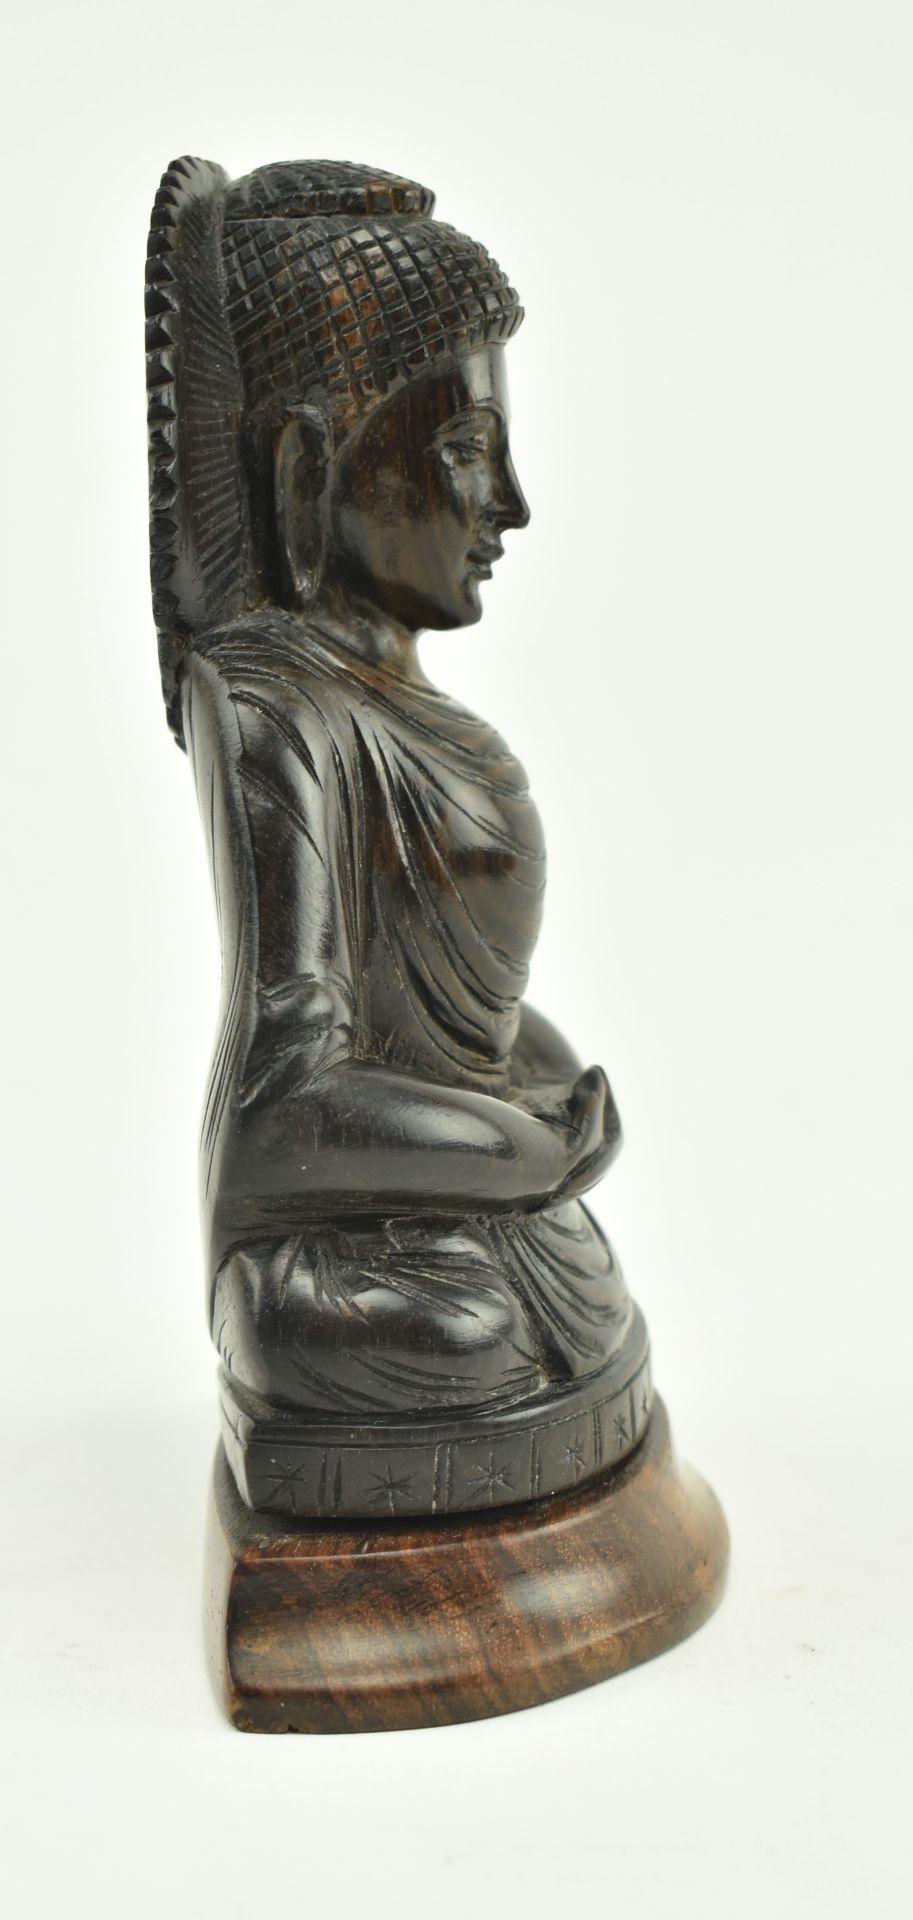 WOODEN CARVED FIGURINE OF A SEATED BUDDHA ON A PLINTH - Image 3 of 6